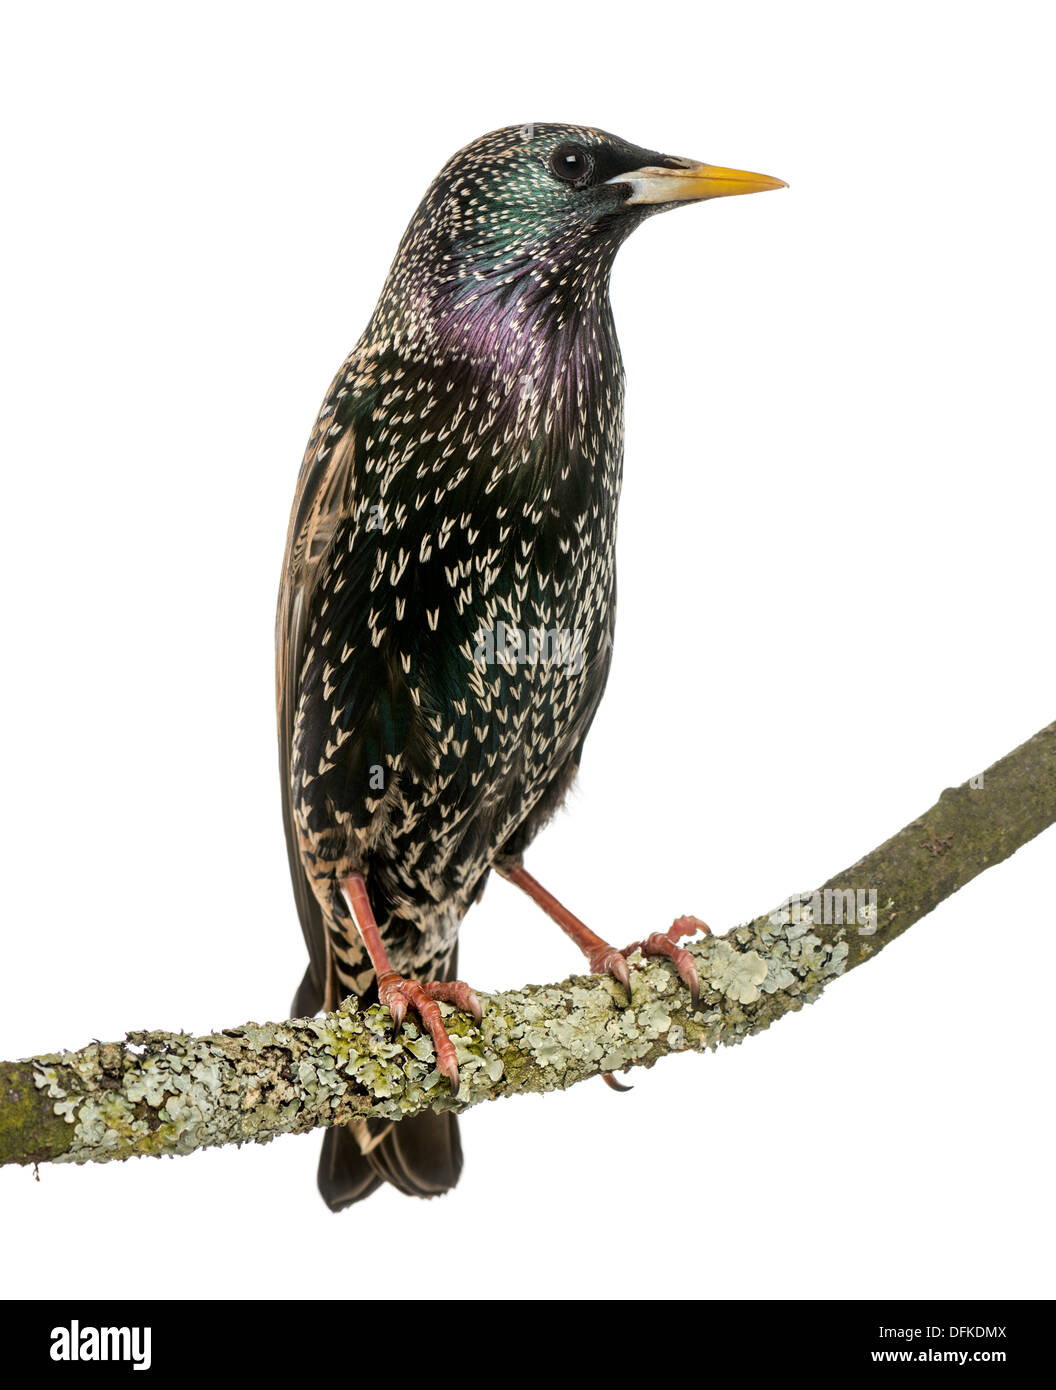 Common Starling perching on a branch, Sturnus vulgaris, against white background Stock Photo